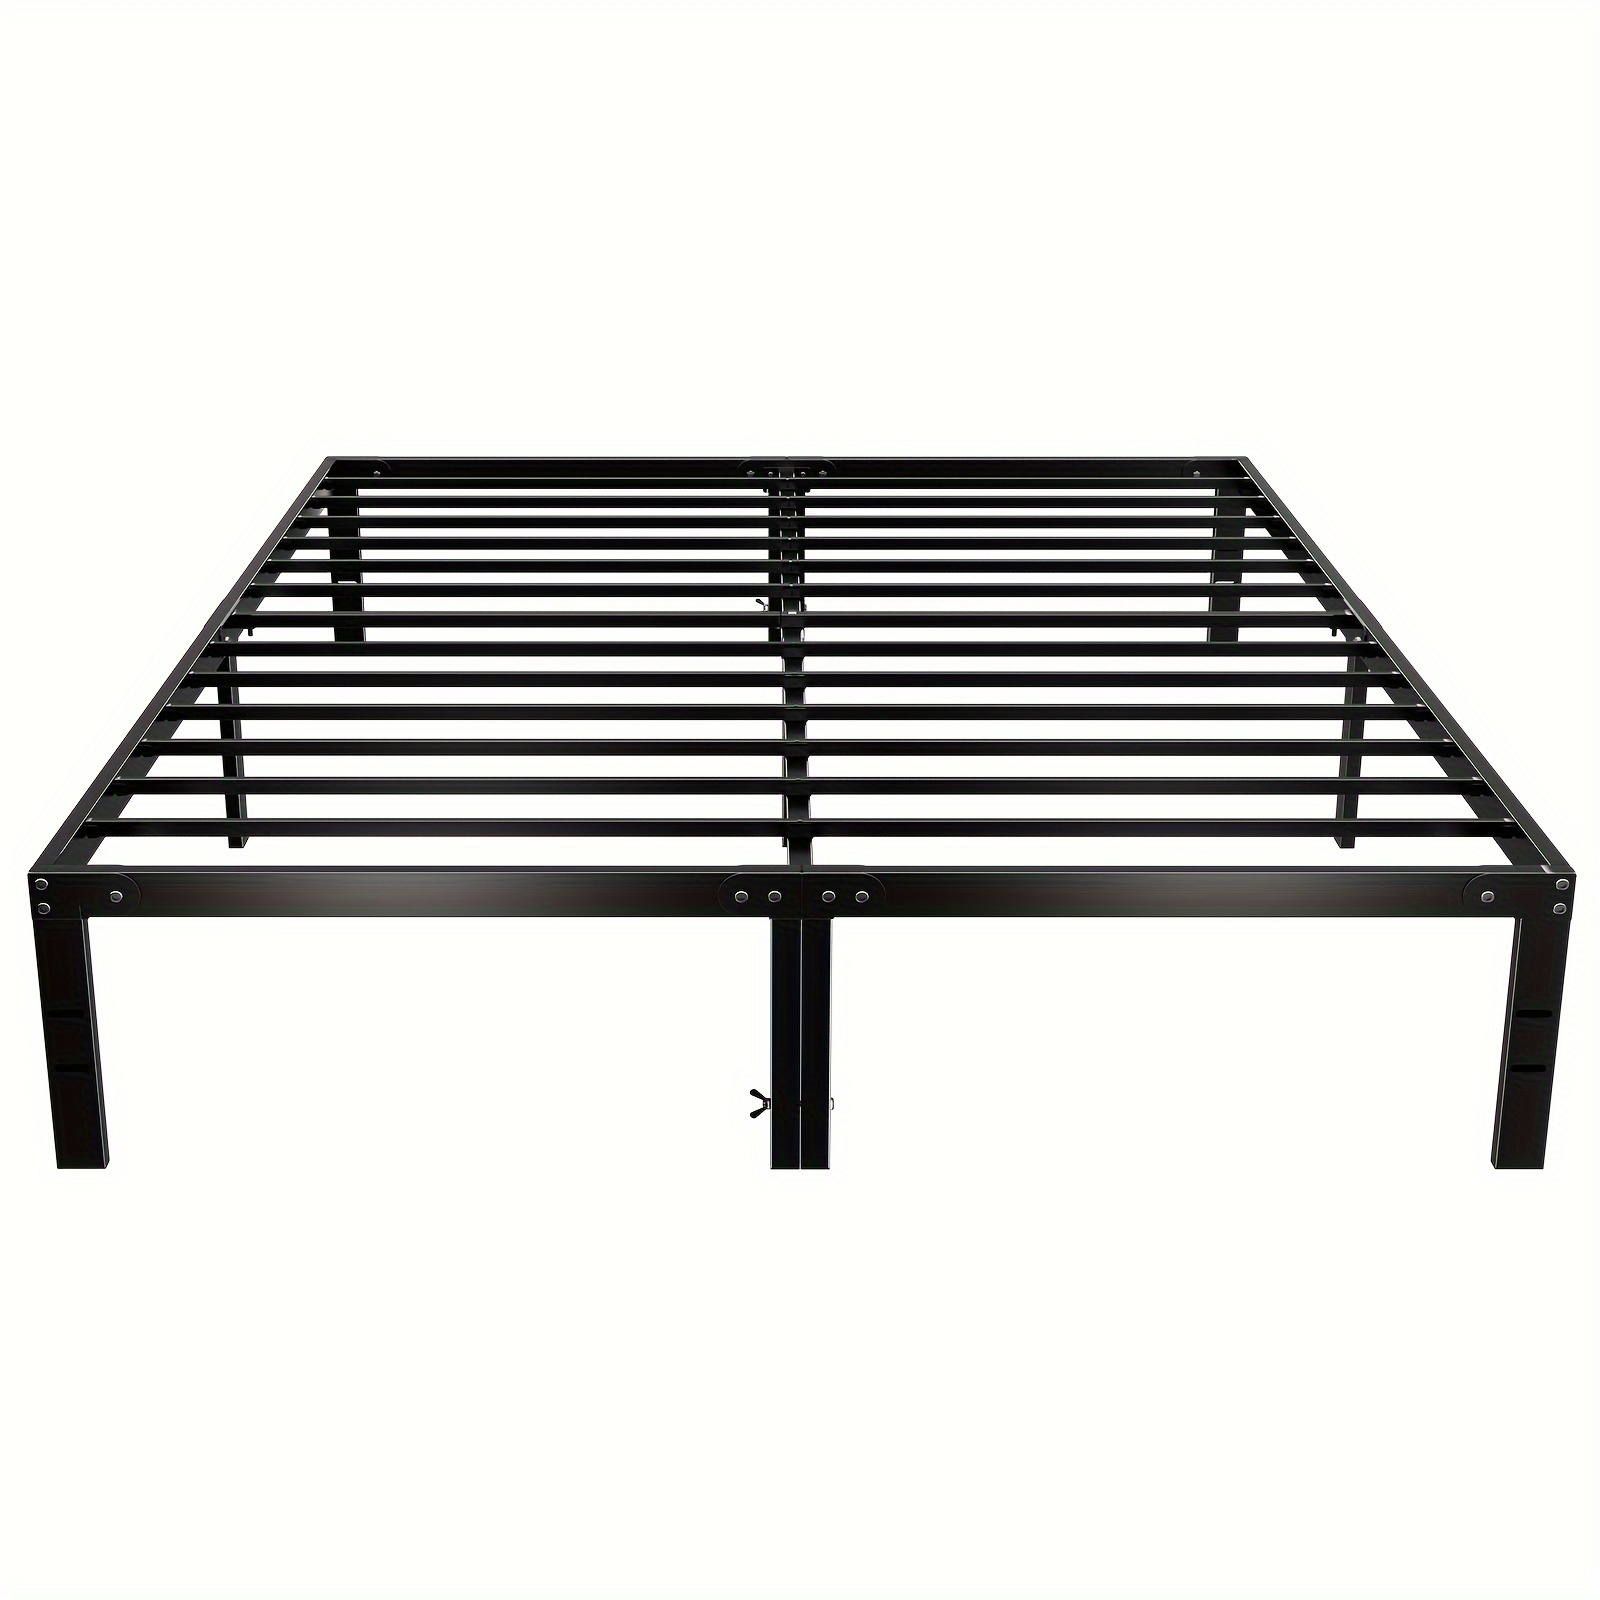 

Bed Frame No Box Spring Needed Heavy Duty Metal Platform Bedroom Frames With Storage Space 14 Inches High Sturdy Steel Slat Support Black